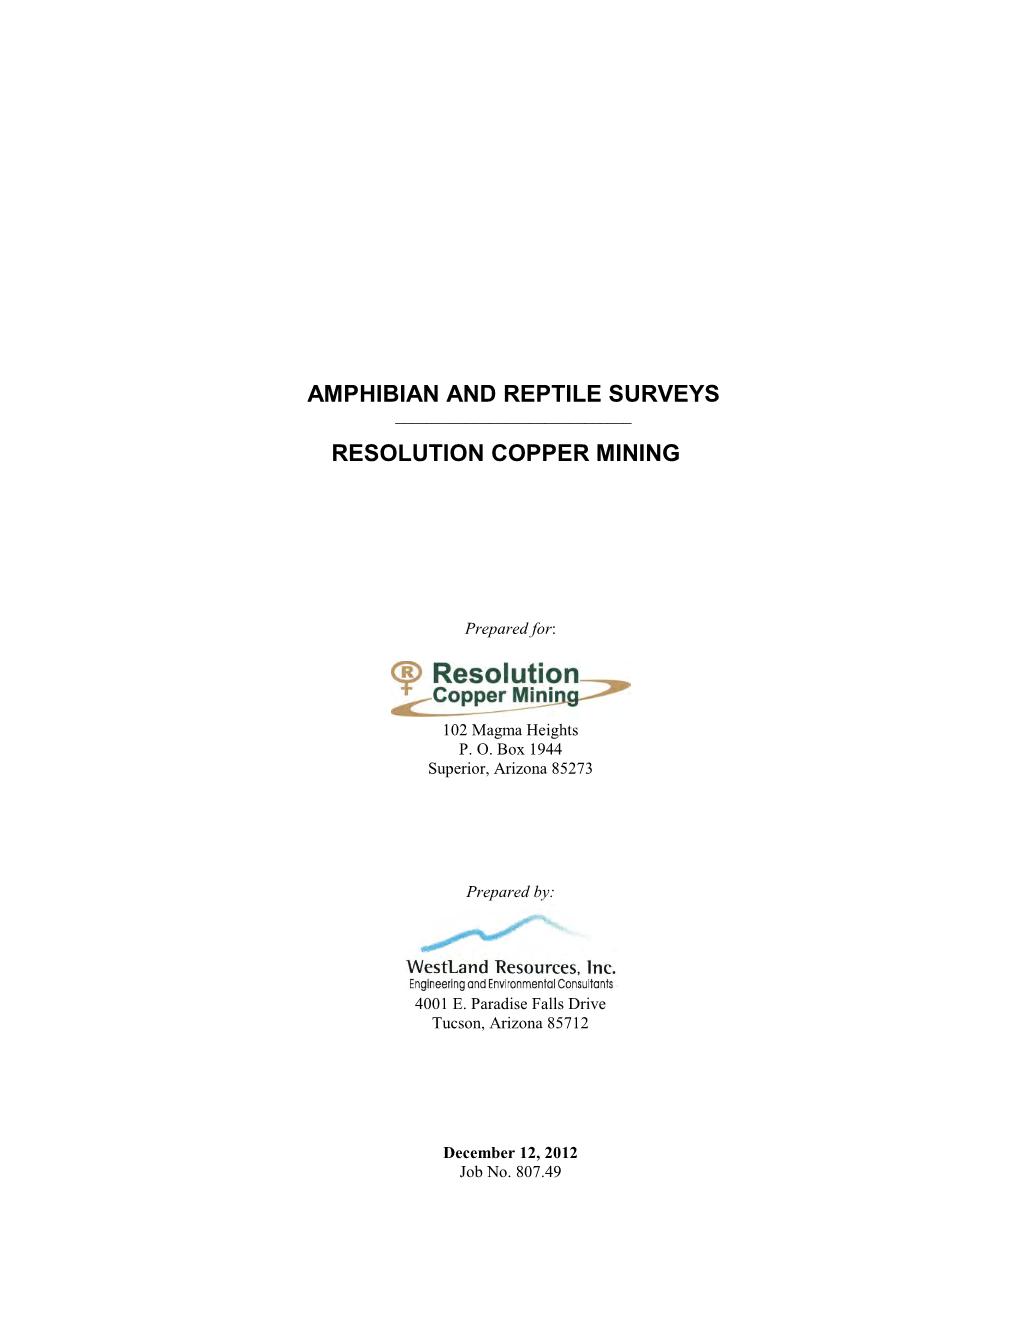 Amphibian and Reptile Surveys ______Resolution Copper Mining